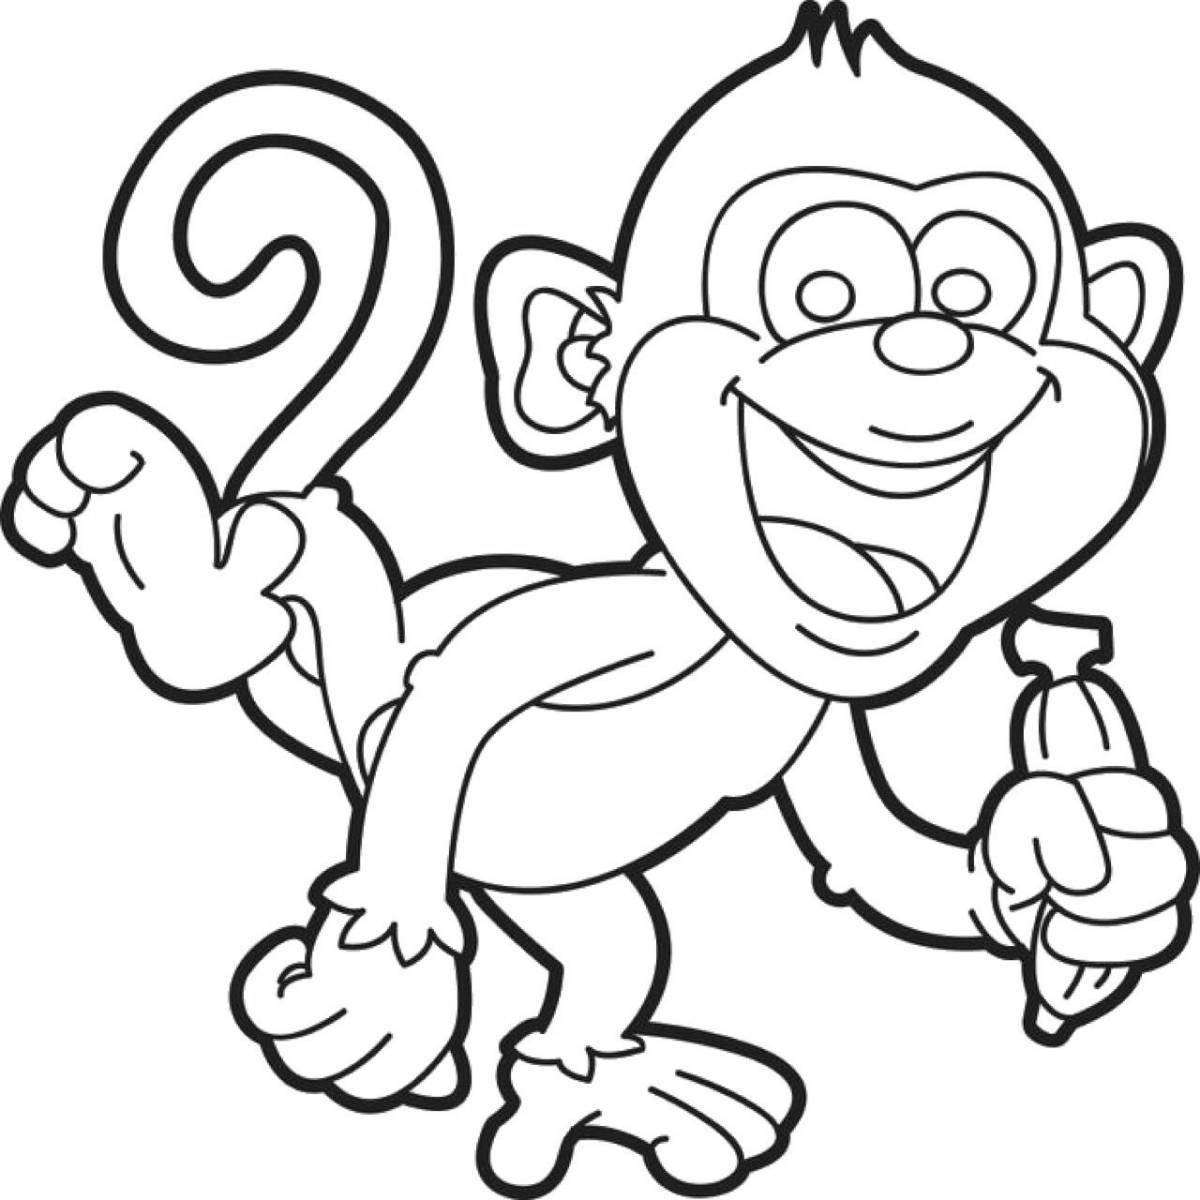 Adorable monkey coloring book for kids